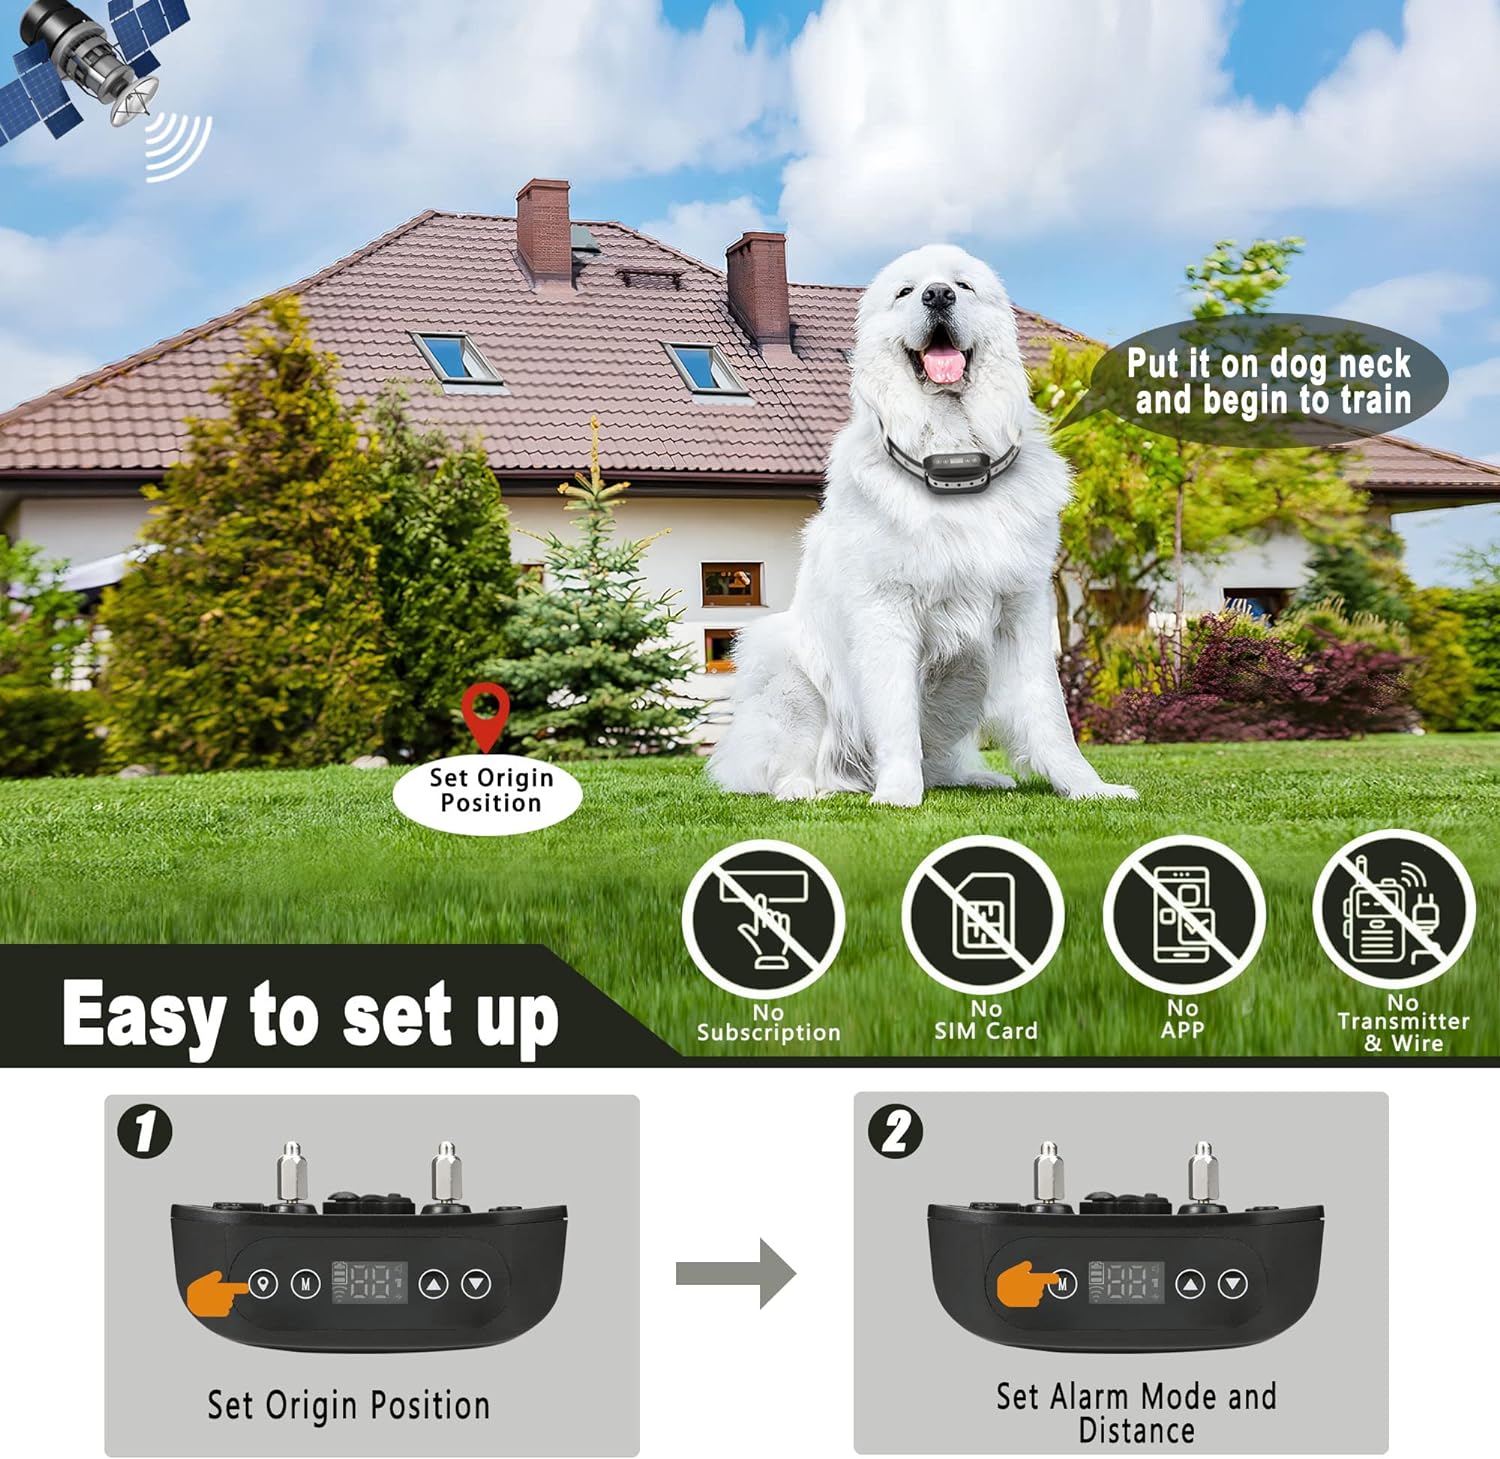 Blingbling Petsfun GPS Wireless Dog Fence System, Electric Satellite Technology Pet Containment System by GPS Signal Boundary for Dogs and Pets with Waterproof Rechargeable Collar Receiver(Black)